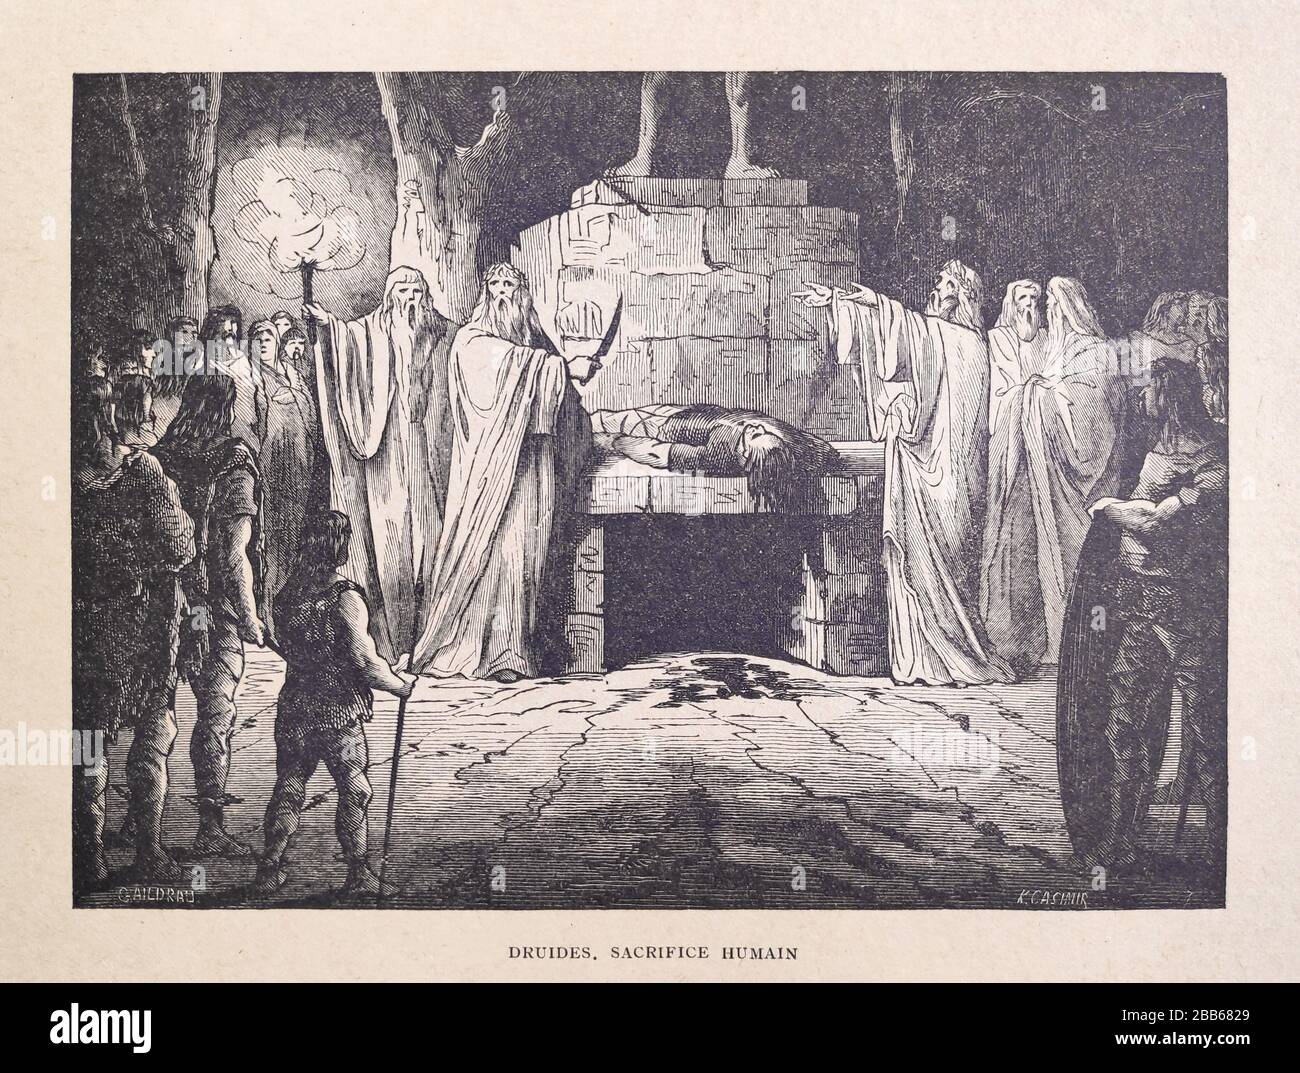 Illustration of a druids practicing human sacrifice by Jules Gaildrau and engraved by K. Casimir printed in the late 19th century. Stock Photo